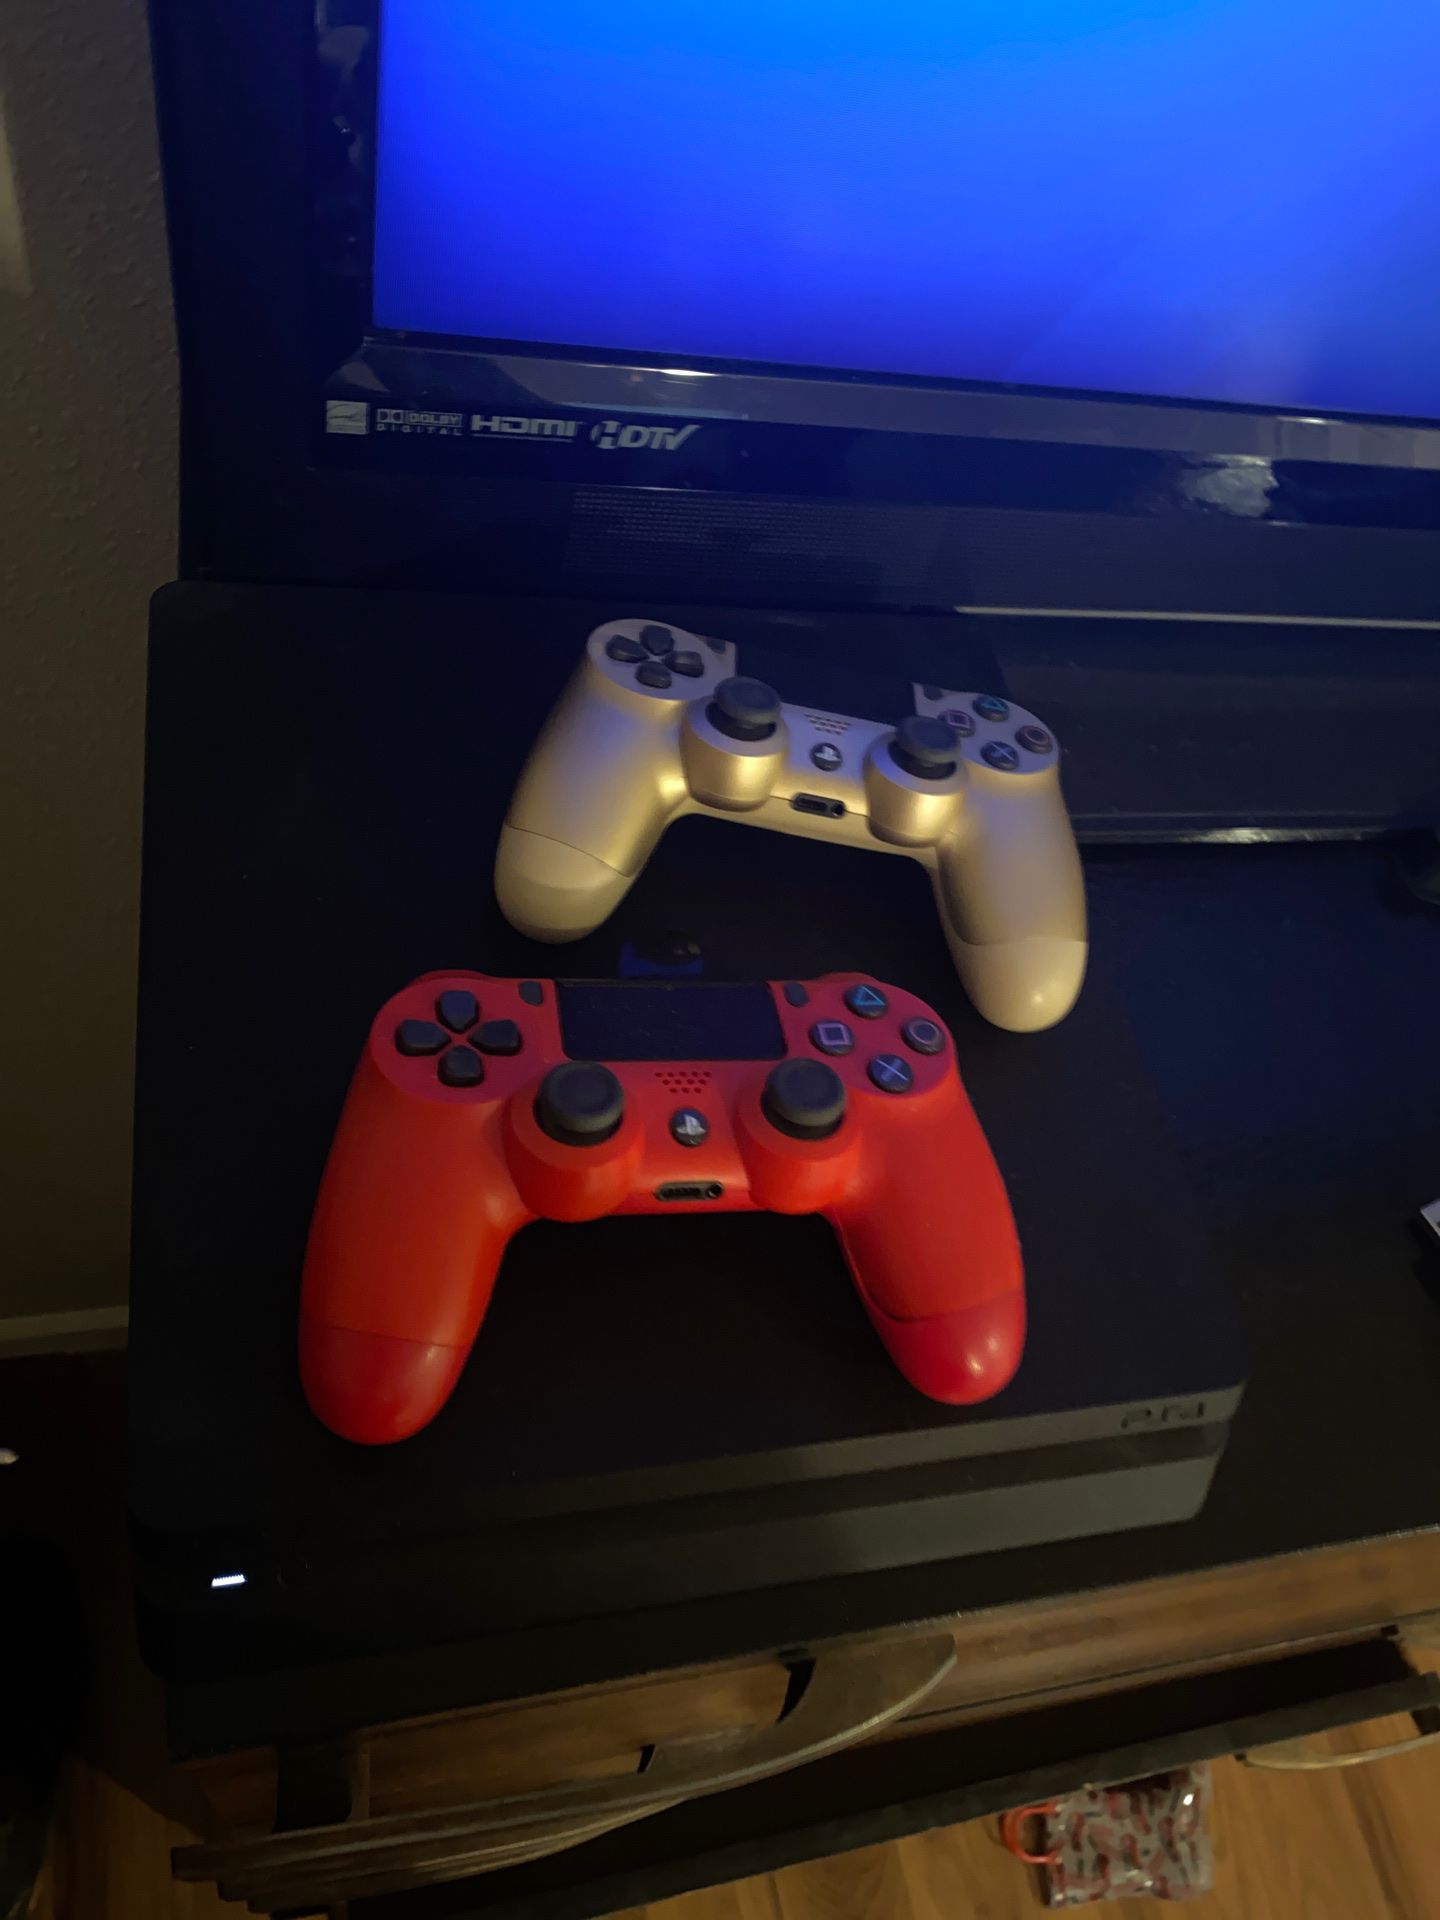 PS4 slim with a brand new gold controller and headset